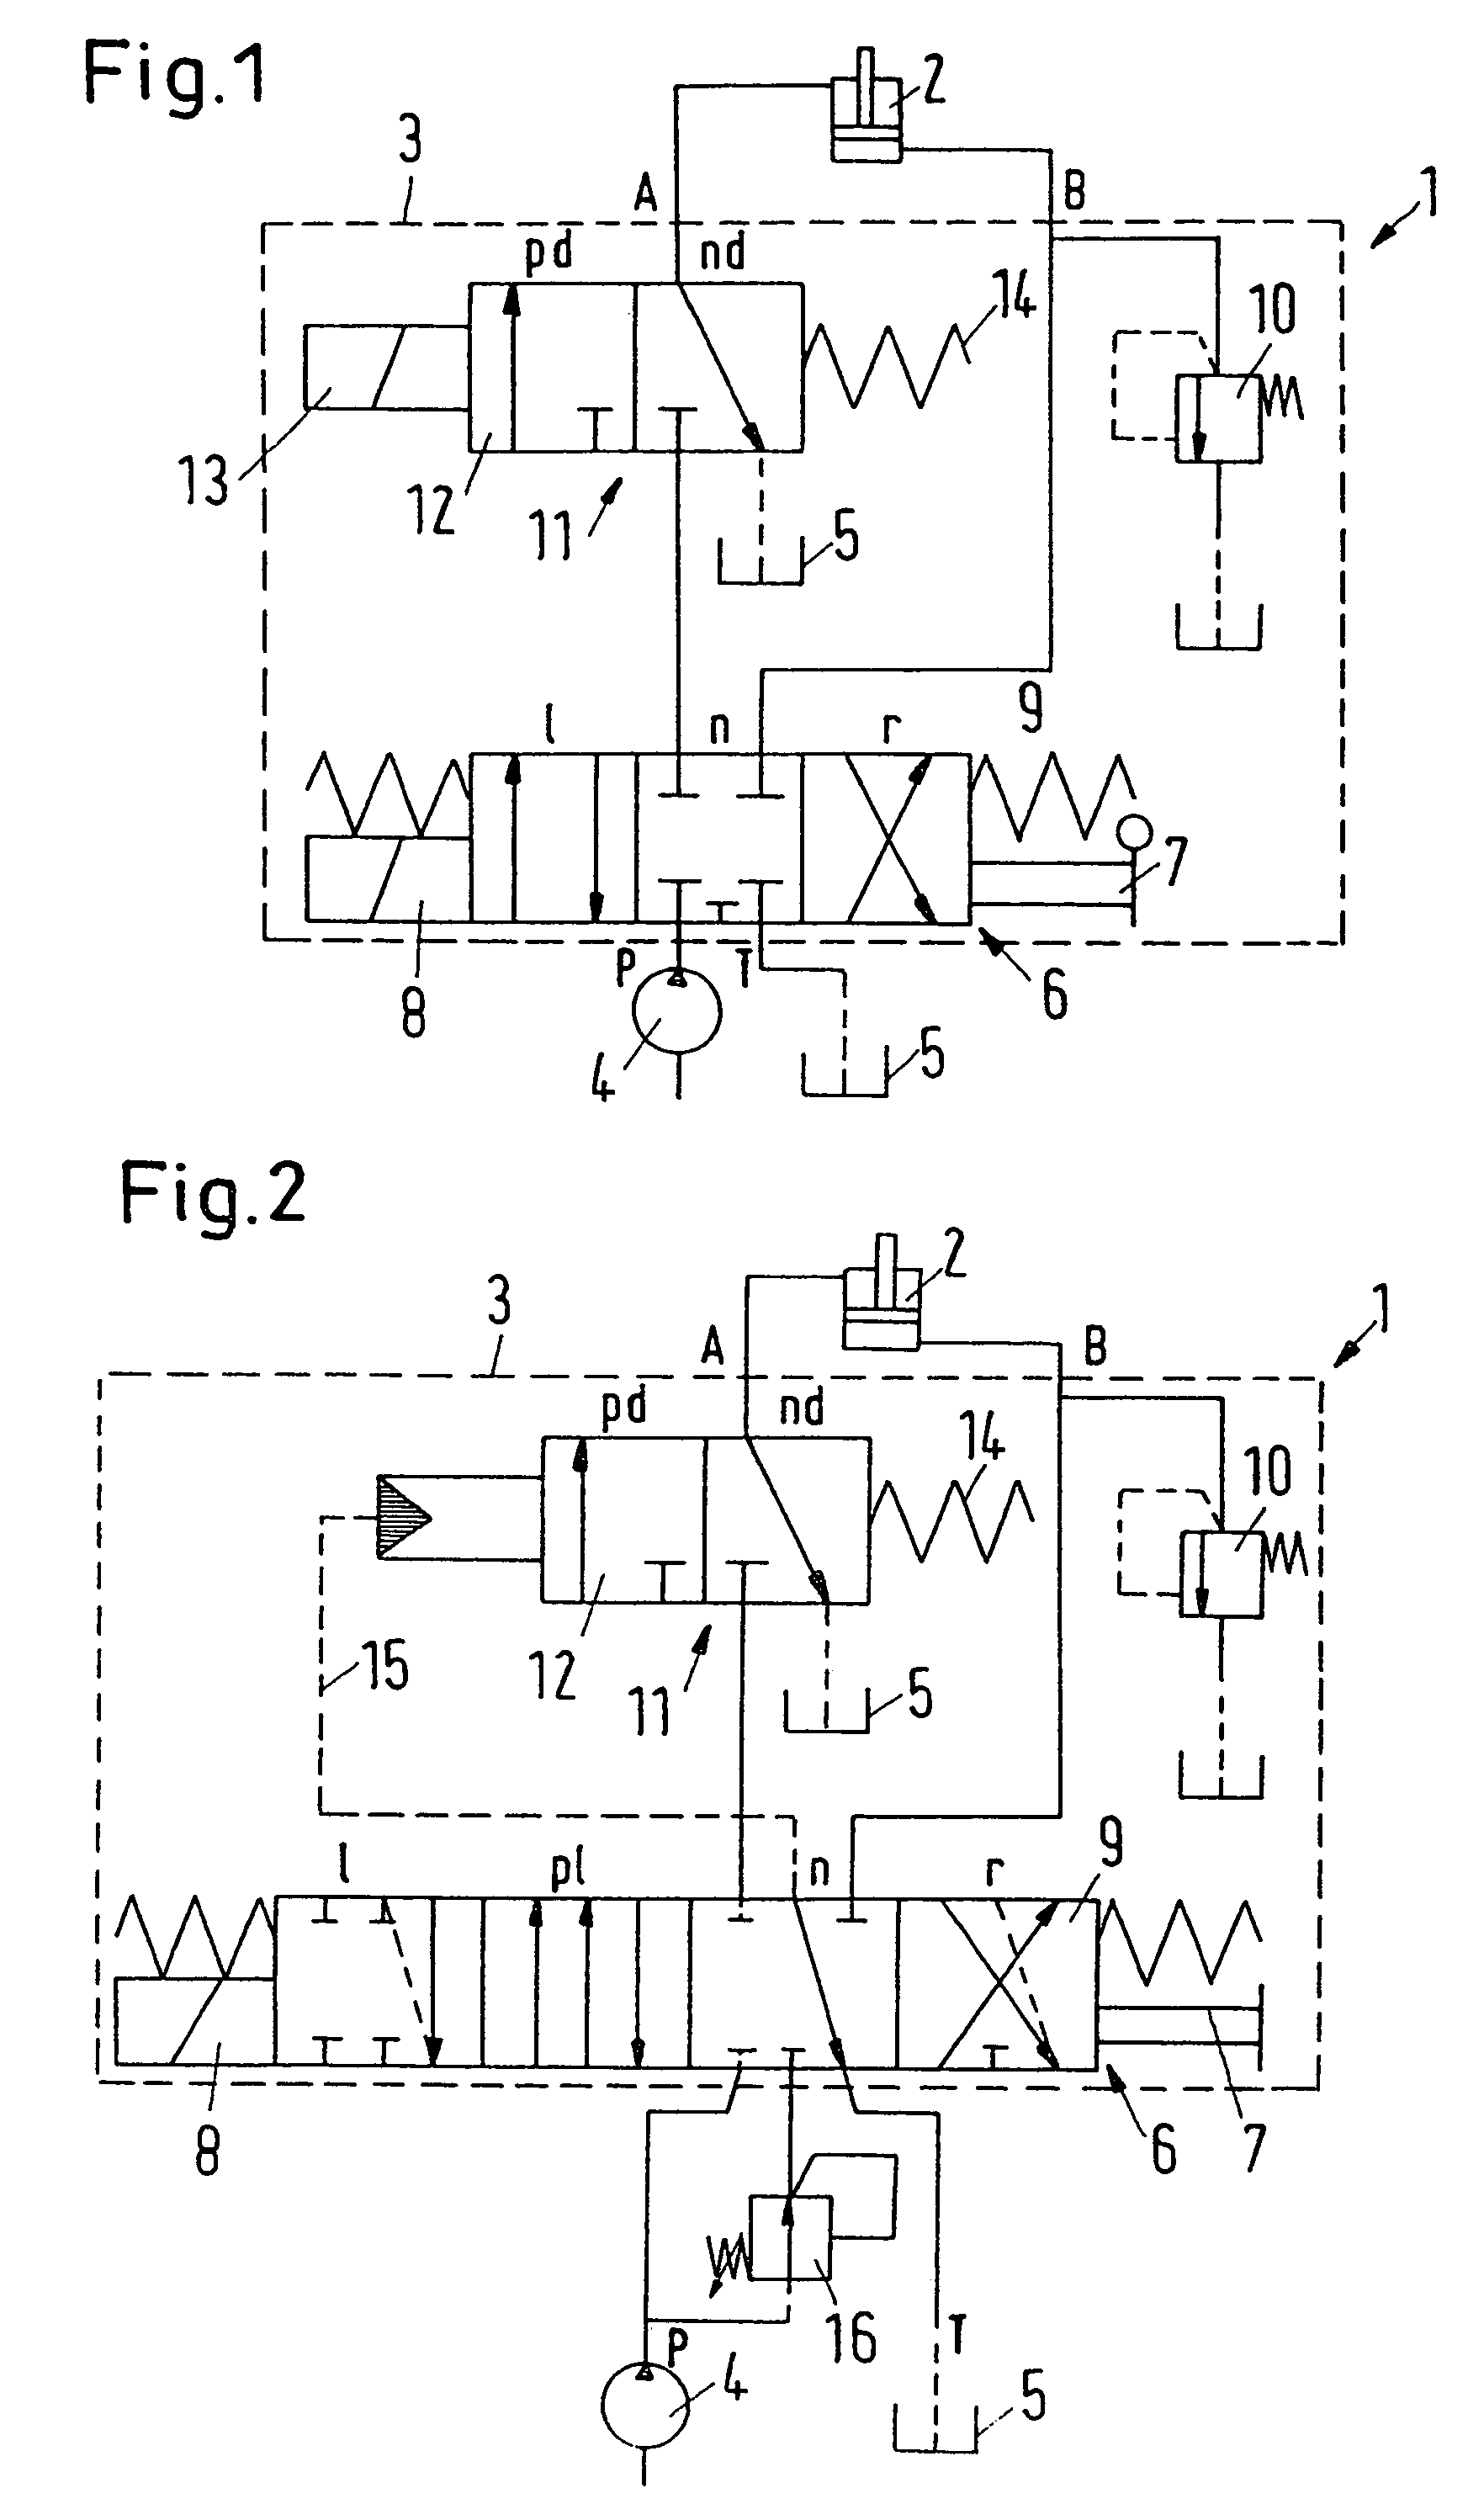 Driving device, particularly lifting device for a working vehicle